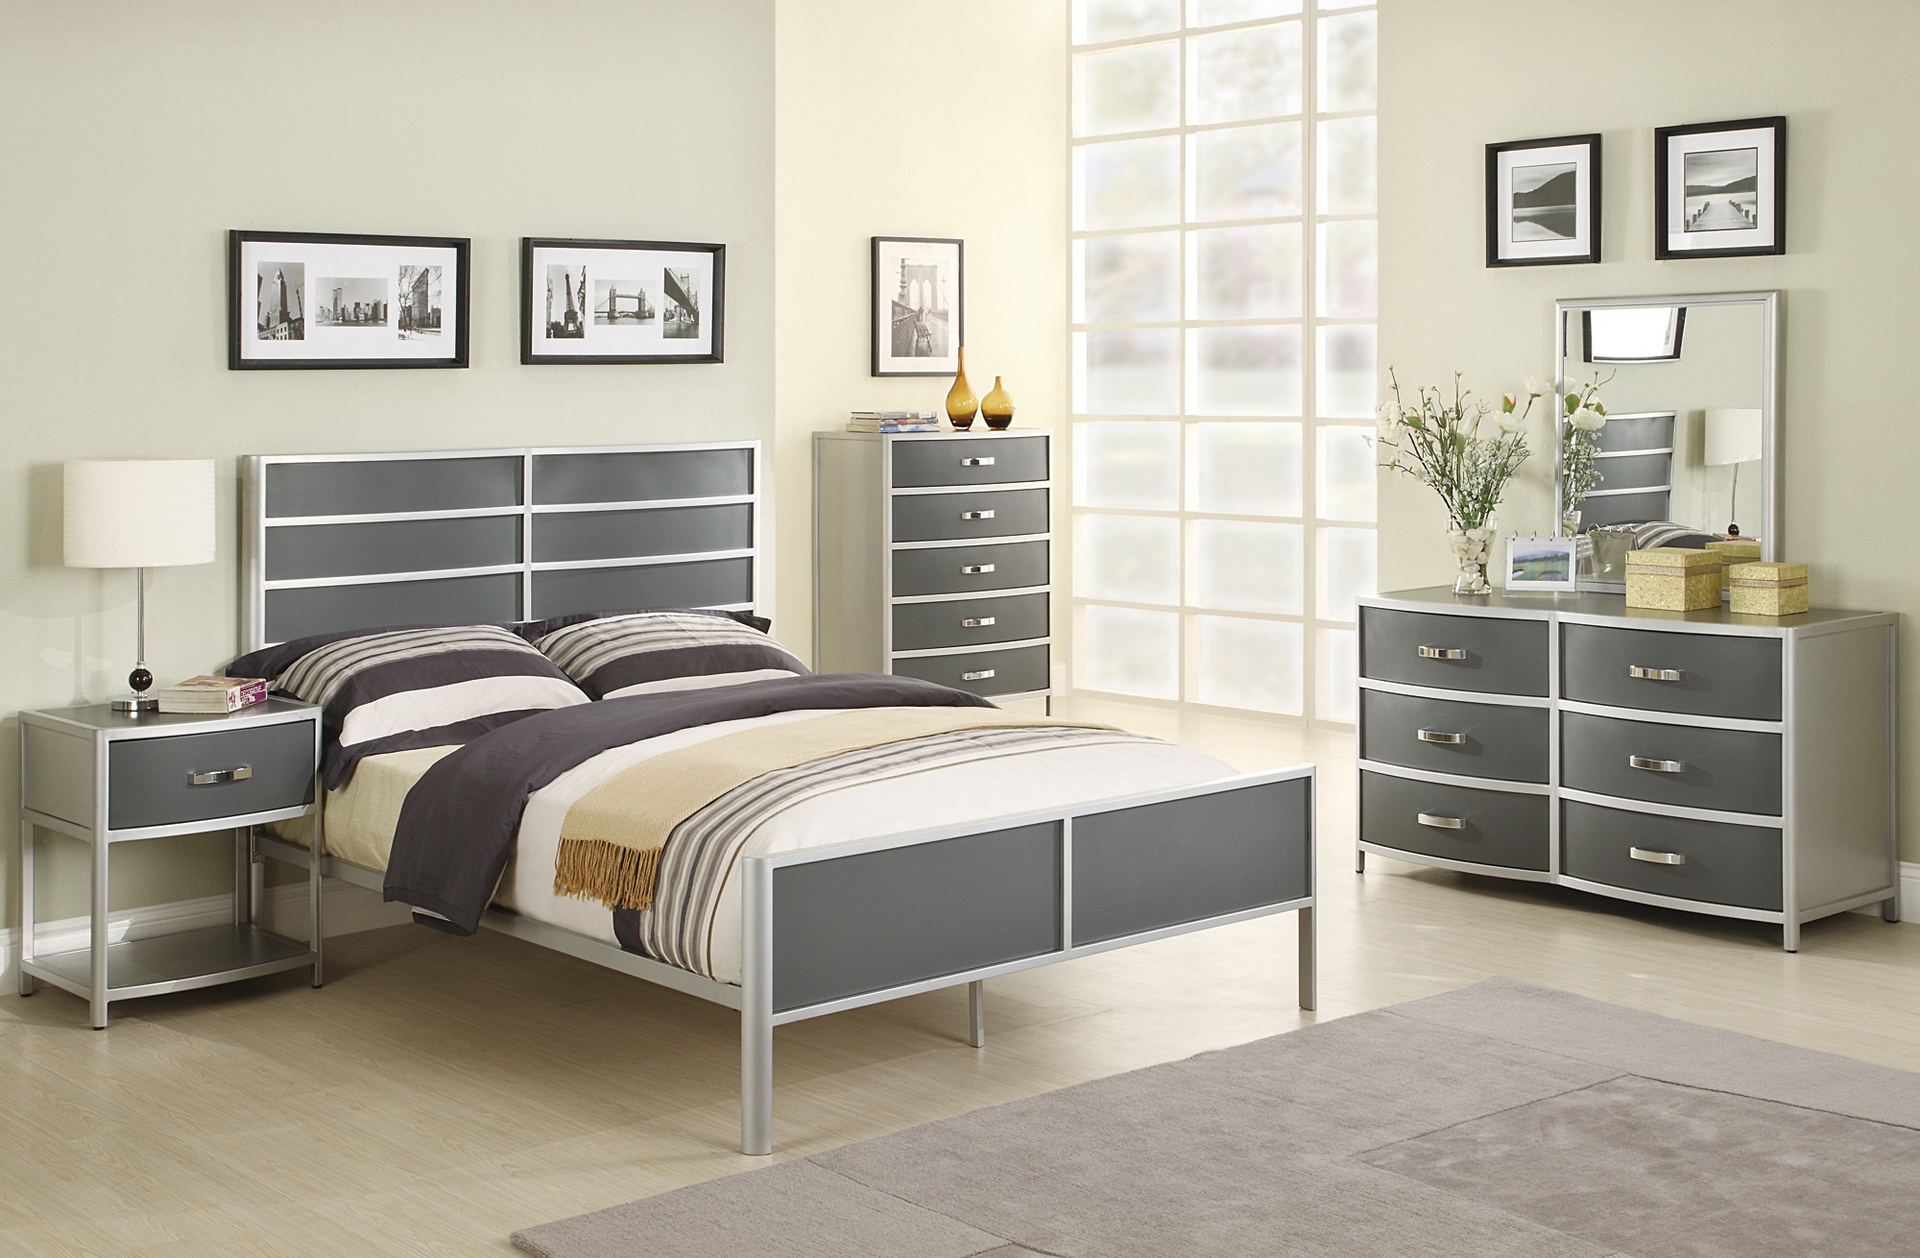 silver bedroom furniture wall ideas